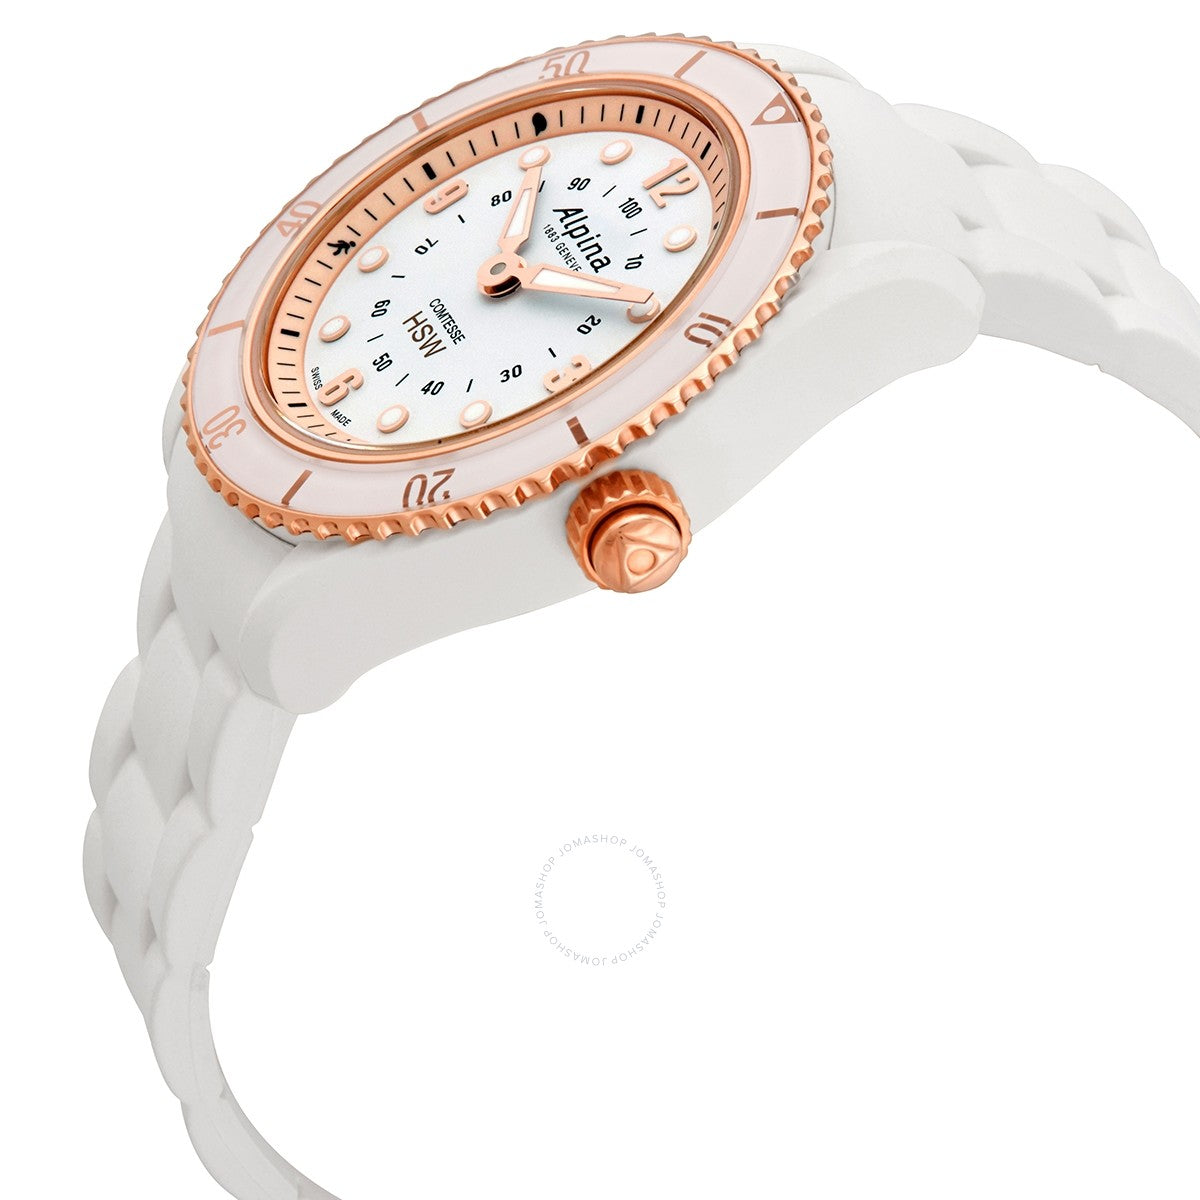 Comtesse(Ladies) Horological Smartwatch (White and Rose-Gold) | Alpina | Luby 